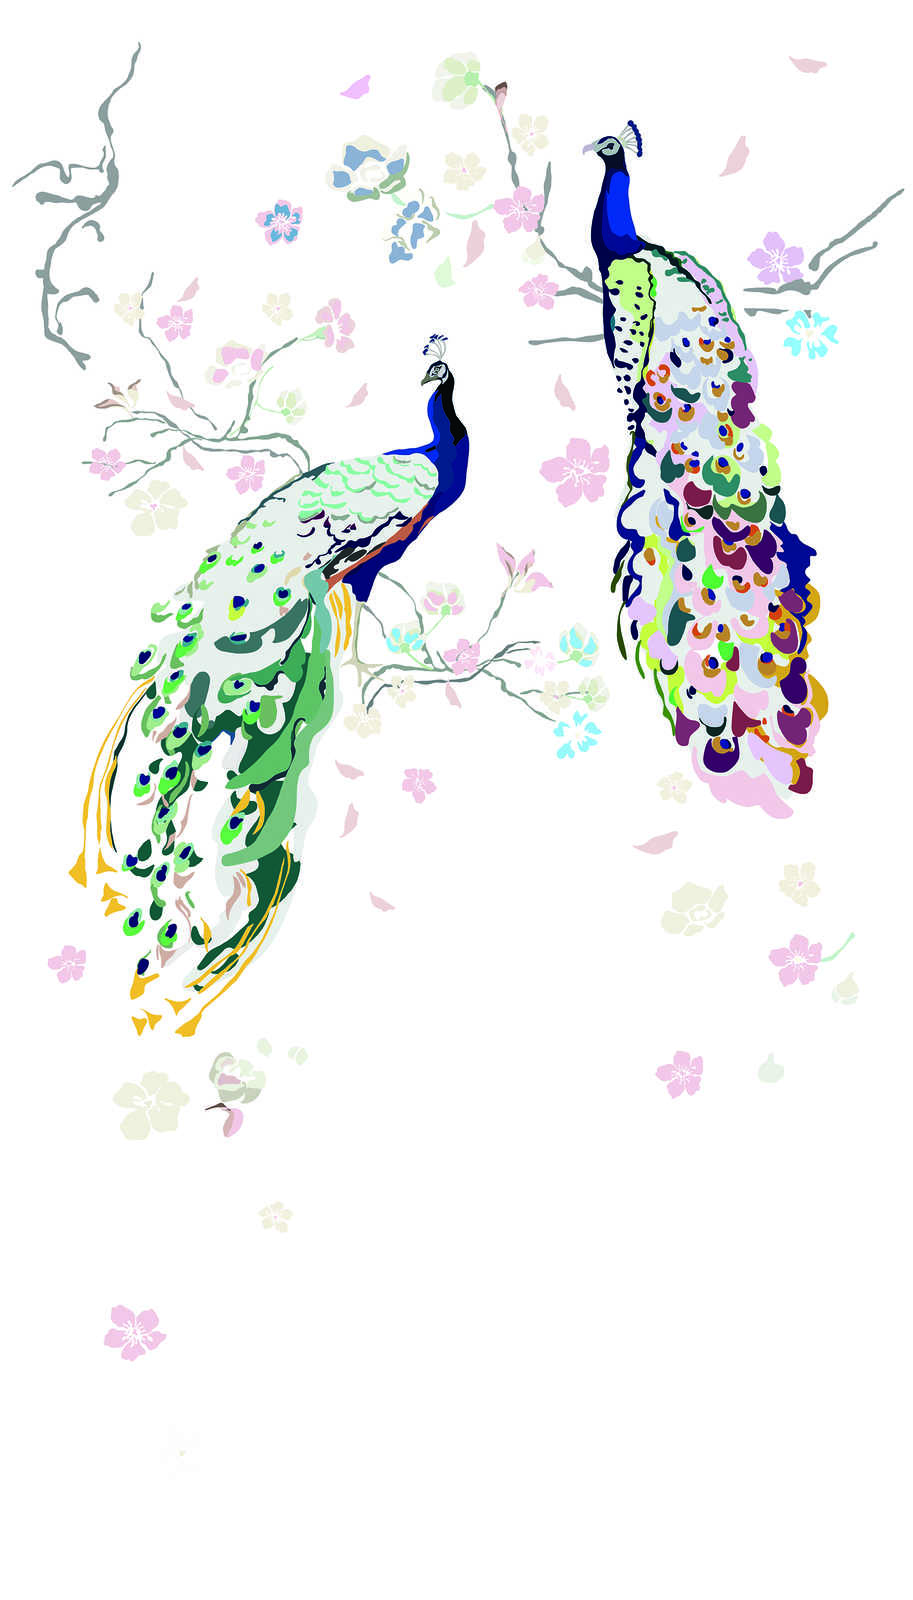             Non-woven wallpaper with peacock and flowers - white, colourful, blue, green, pink
        